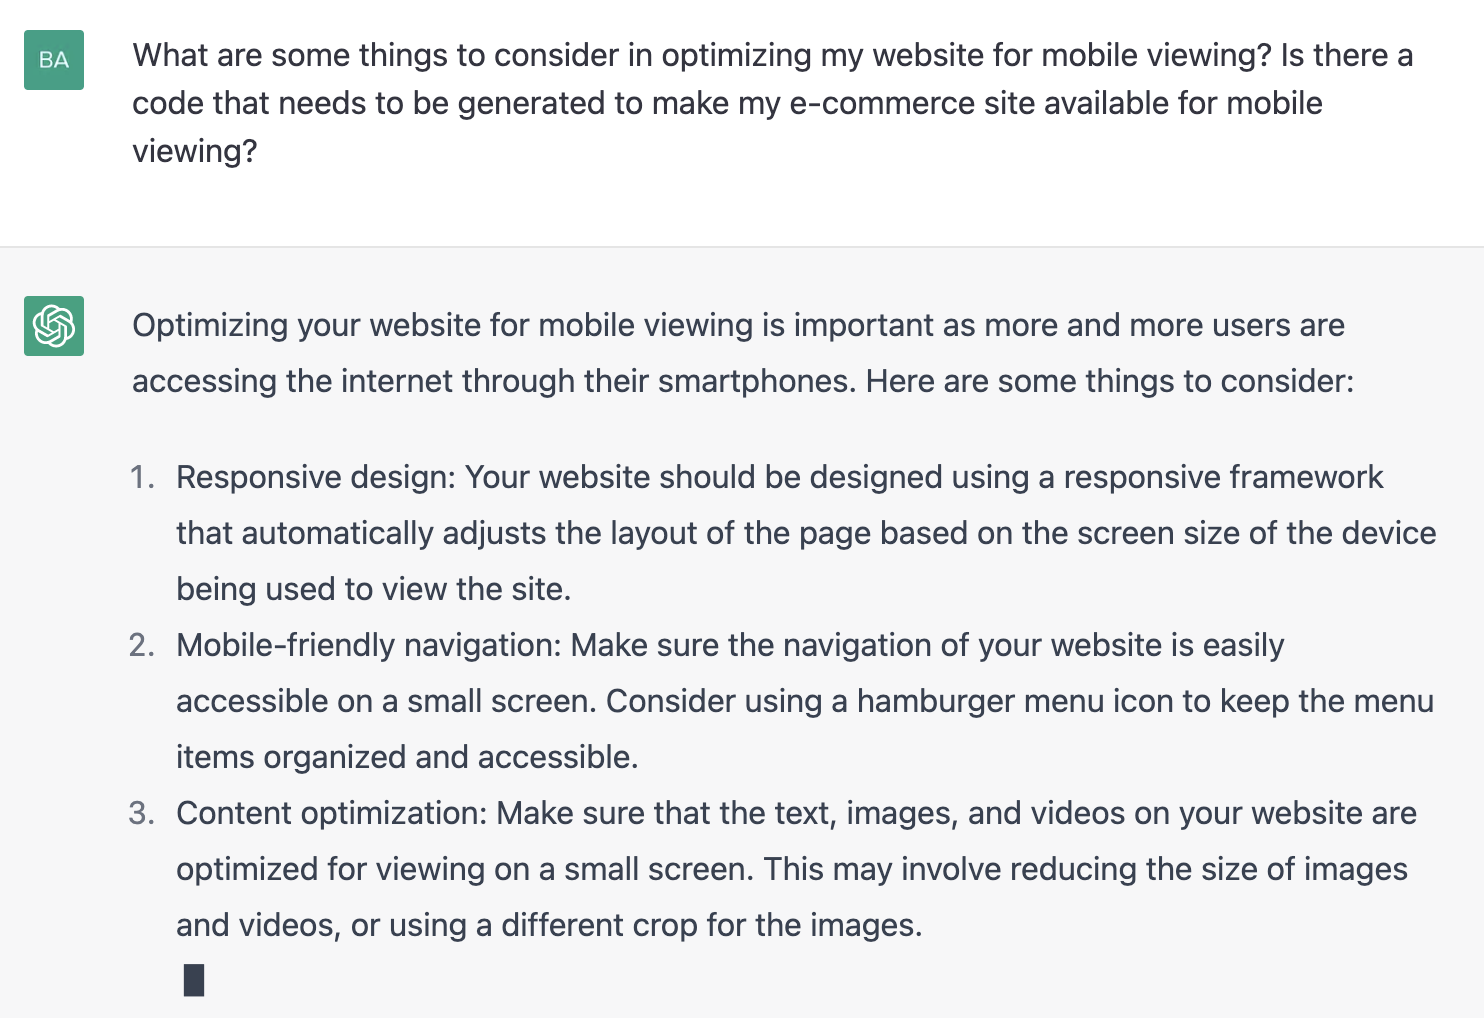 ChatGPT prompt about some things to consider in optimizing website for mobile viewing